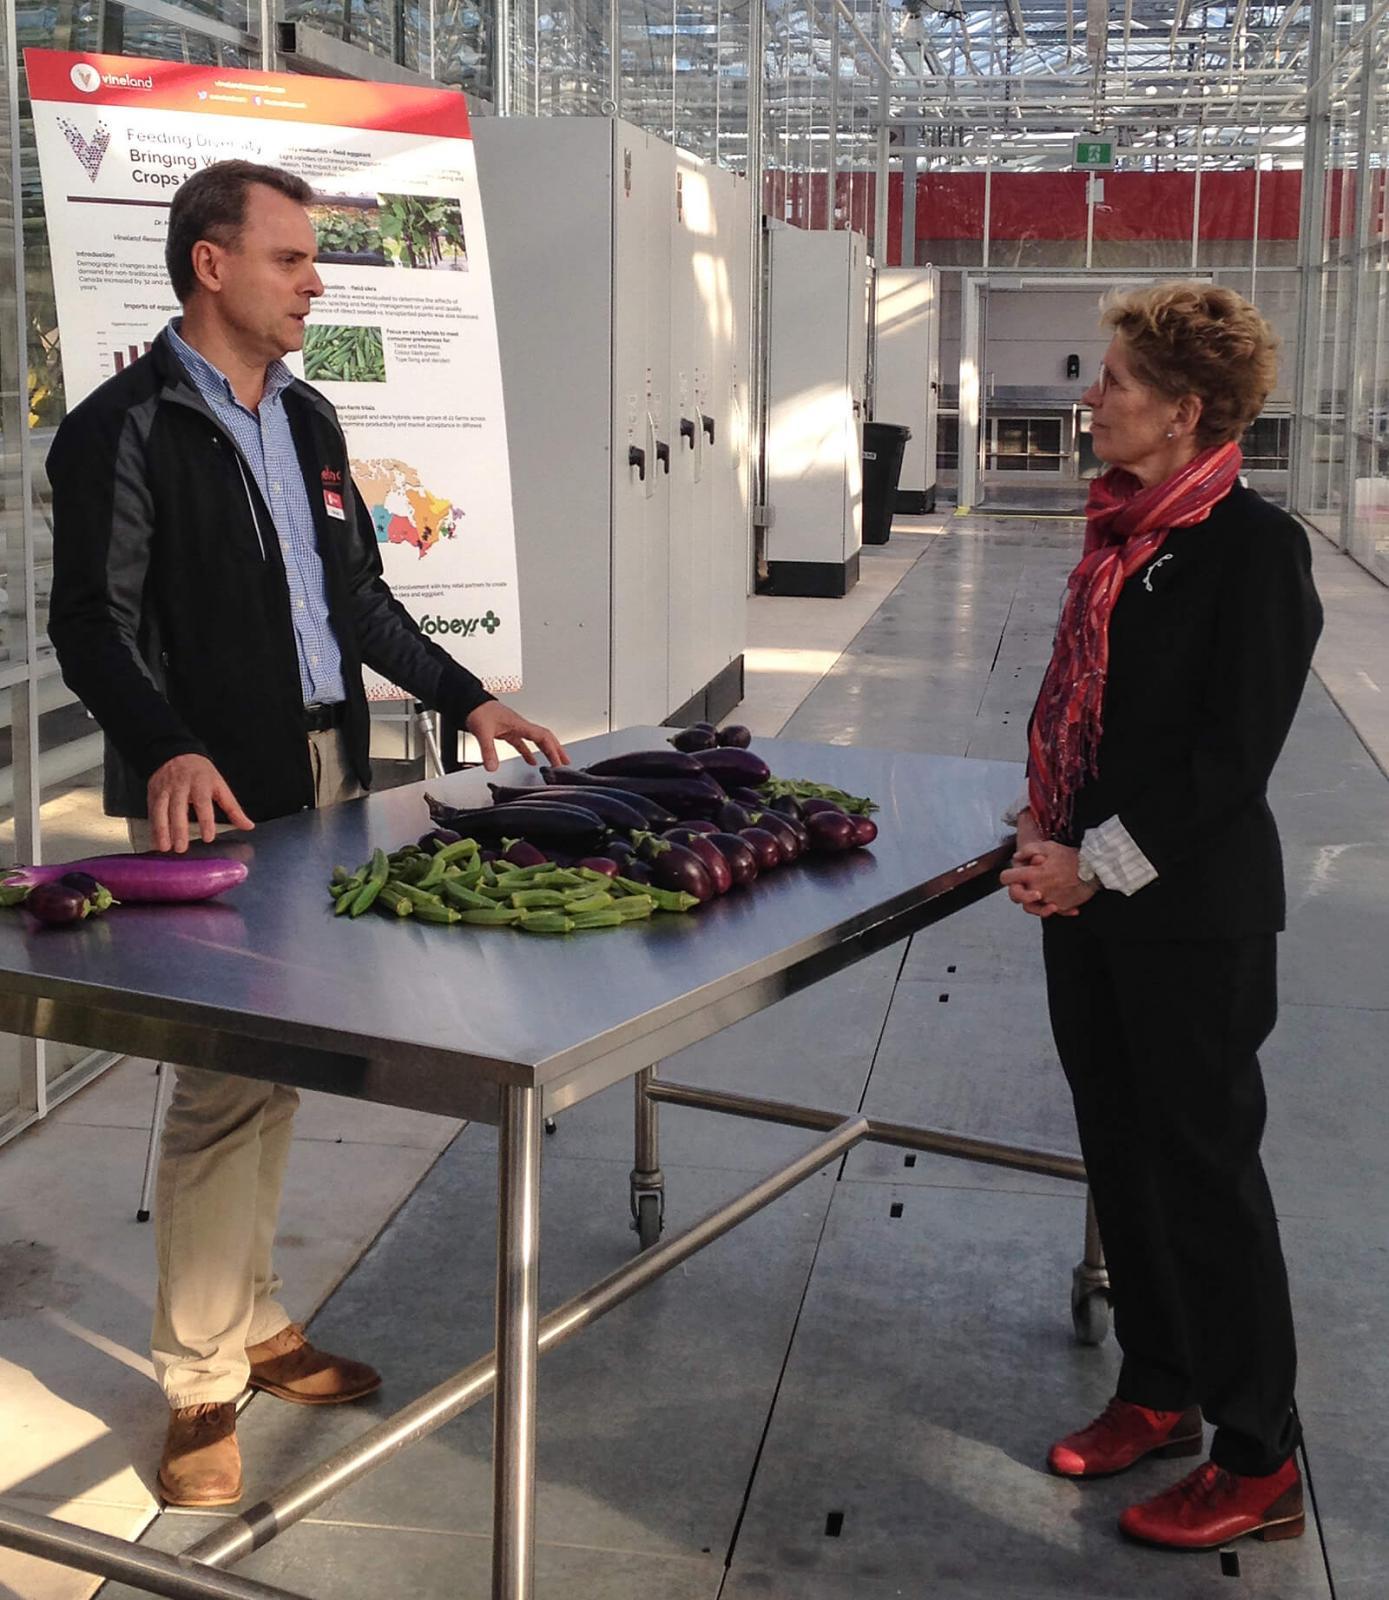 Dr. Viliam Zvalo discusses world crops research with Ontario Premier Kathleen Wynne.